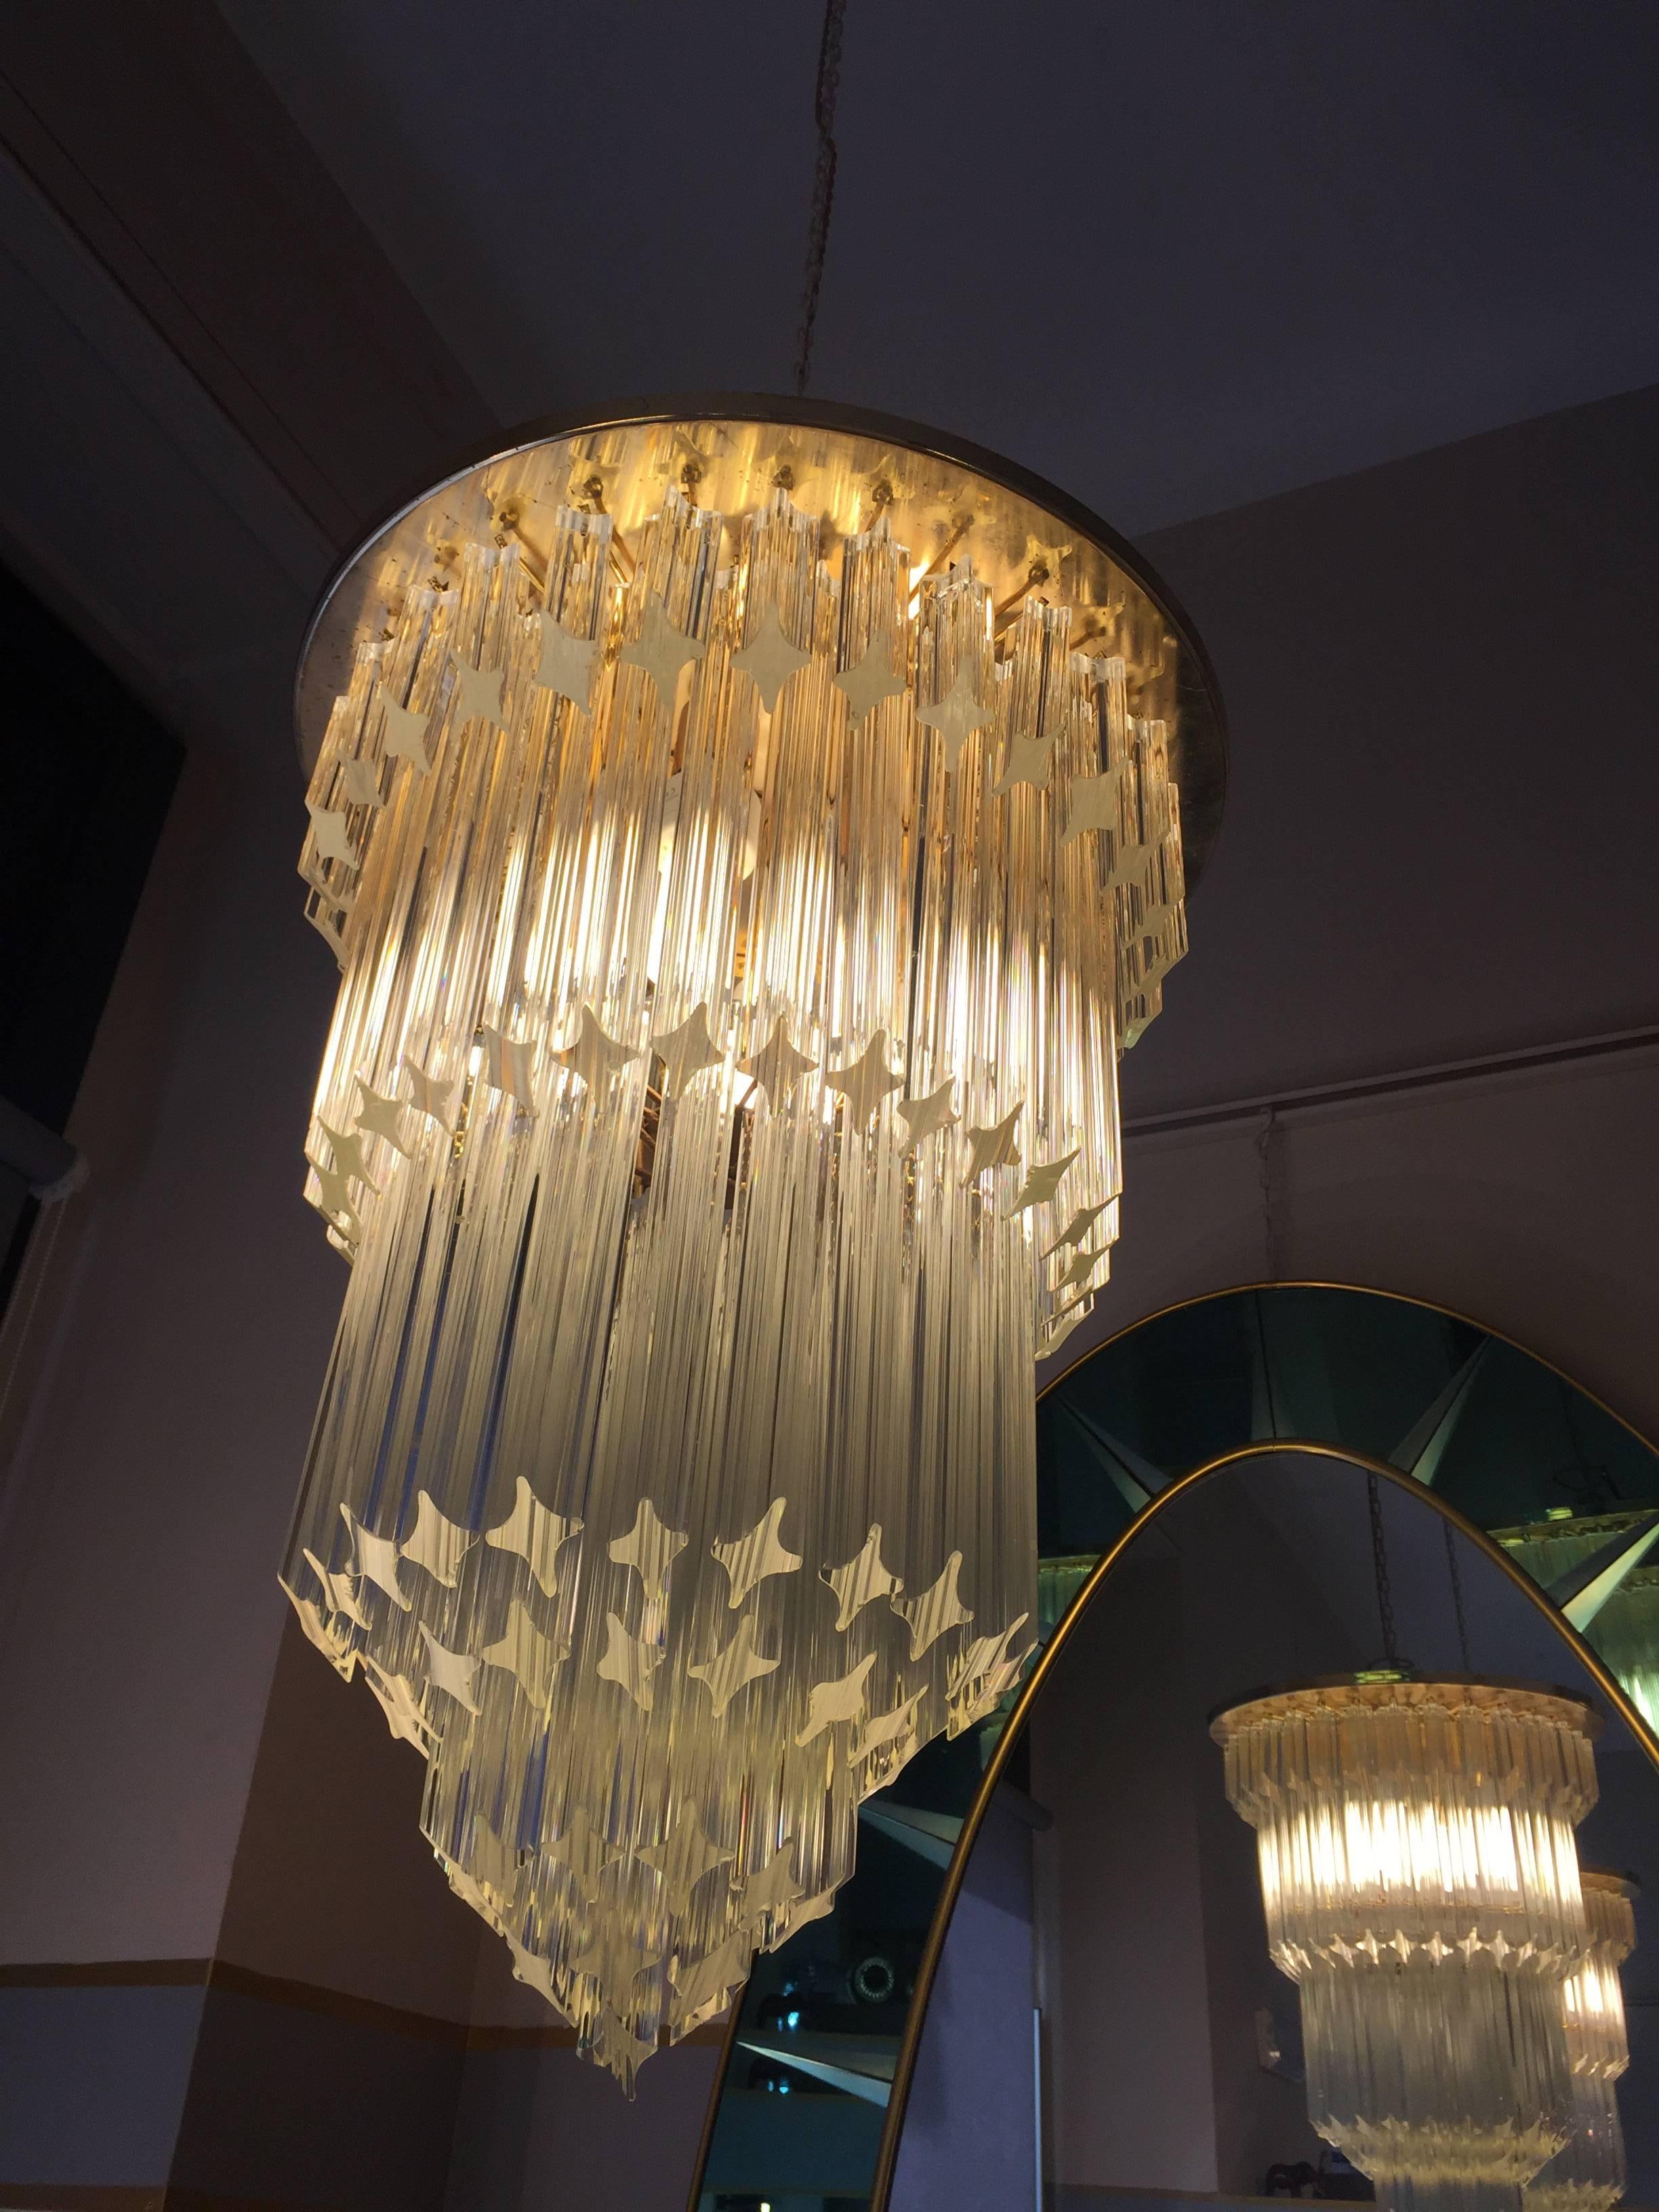 Chandeliers made in Italy during 1960s. Composed by massive glass pieces and a brass disc in the upper part.

They have four lights each. They have been rewired, cleaned and restored in a conservative way.

They are completely dismountable.

To have